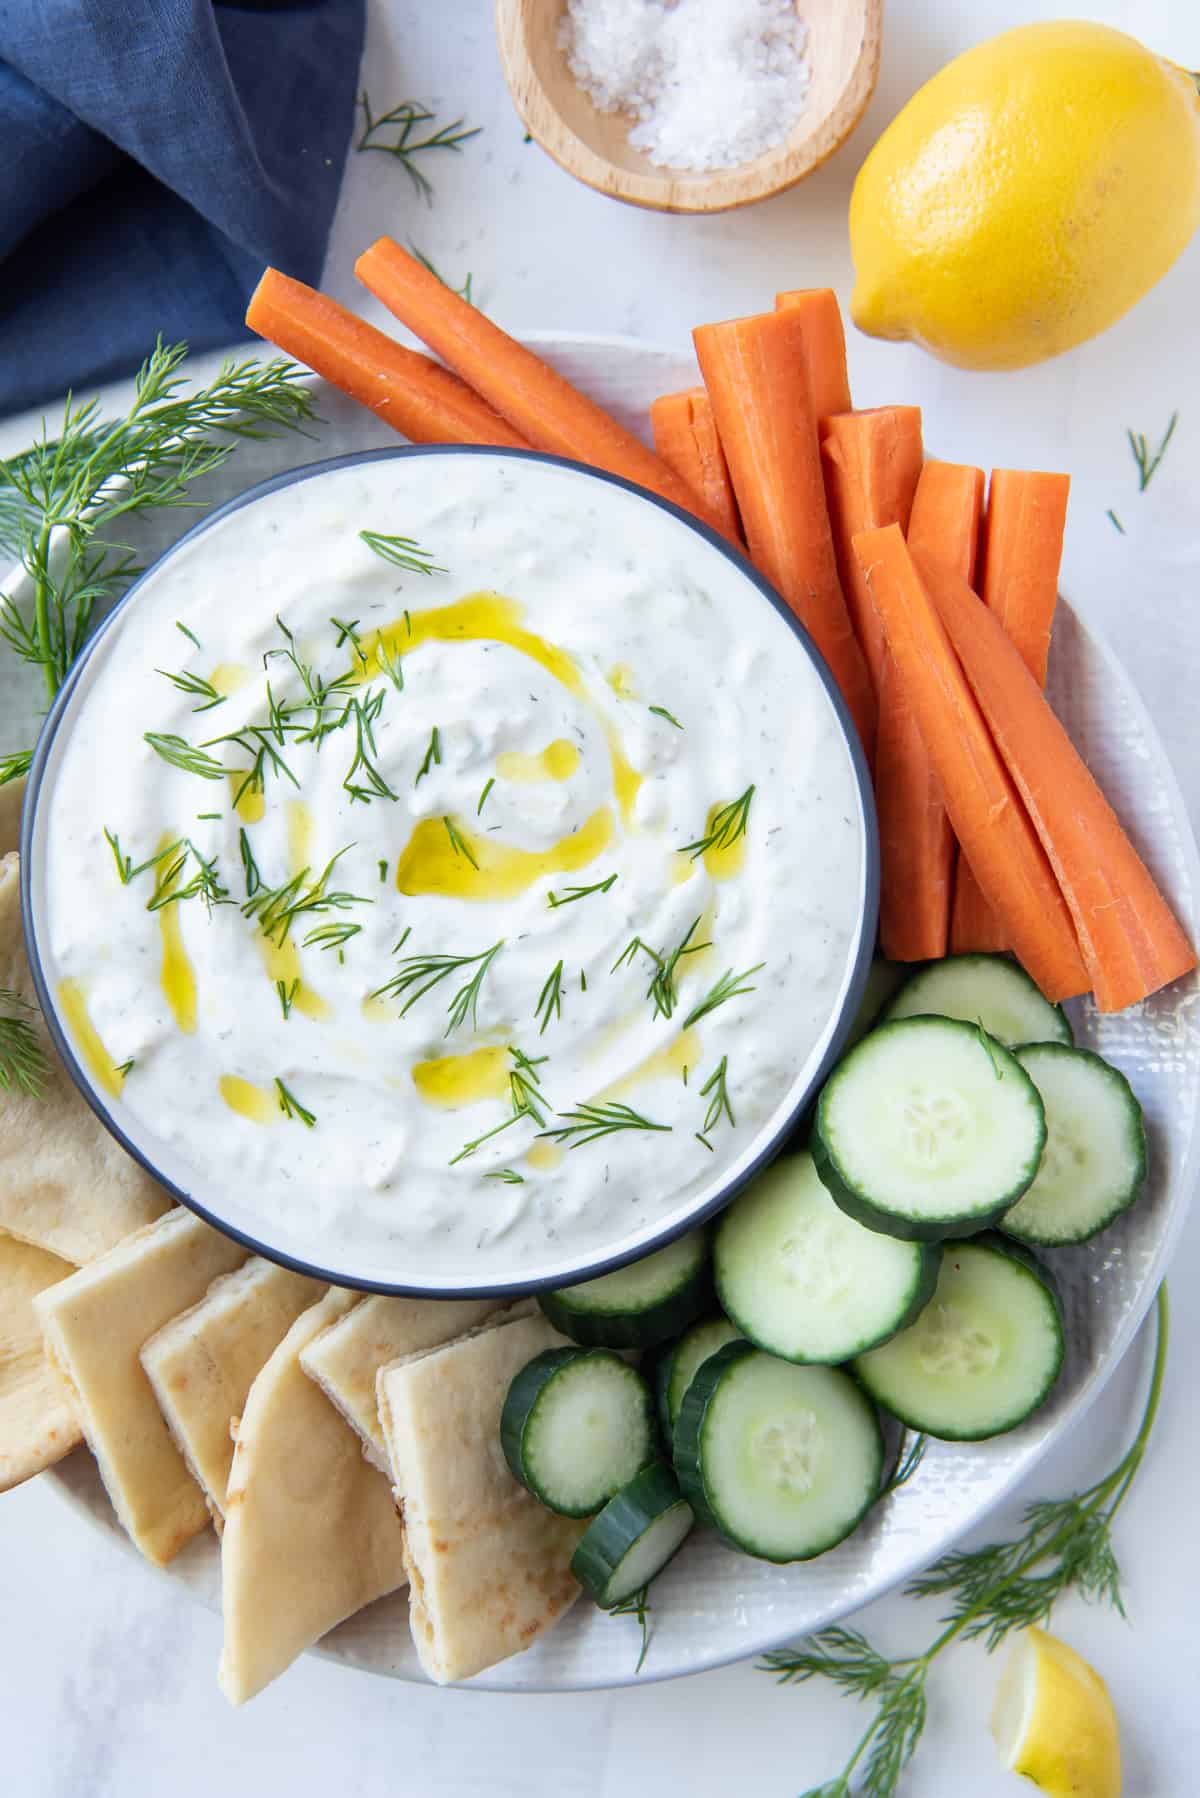 An over the top shot of a bowl of Tzatziki on a platter with veggies and pita.